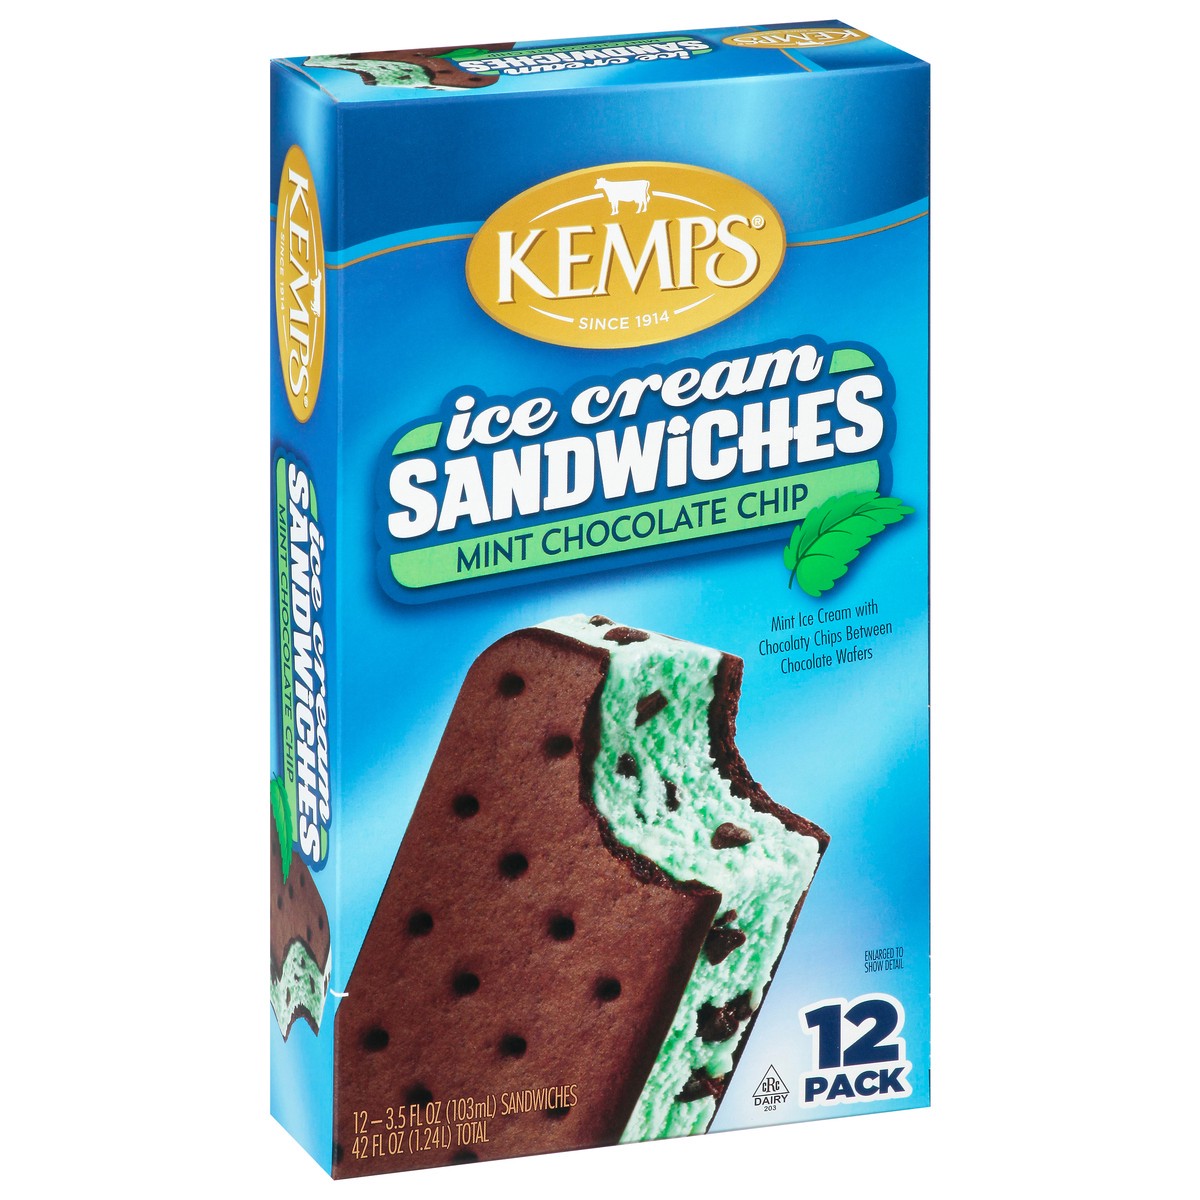 slide 6 of 14, Kemps Mint Chocolate Chip Ice Cream Sandwiches, 12 ct